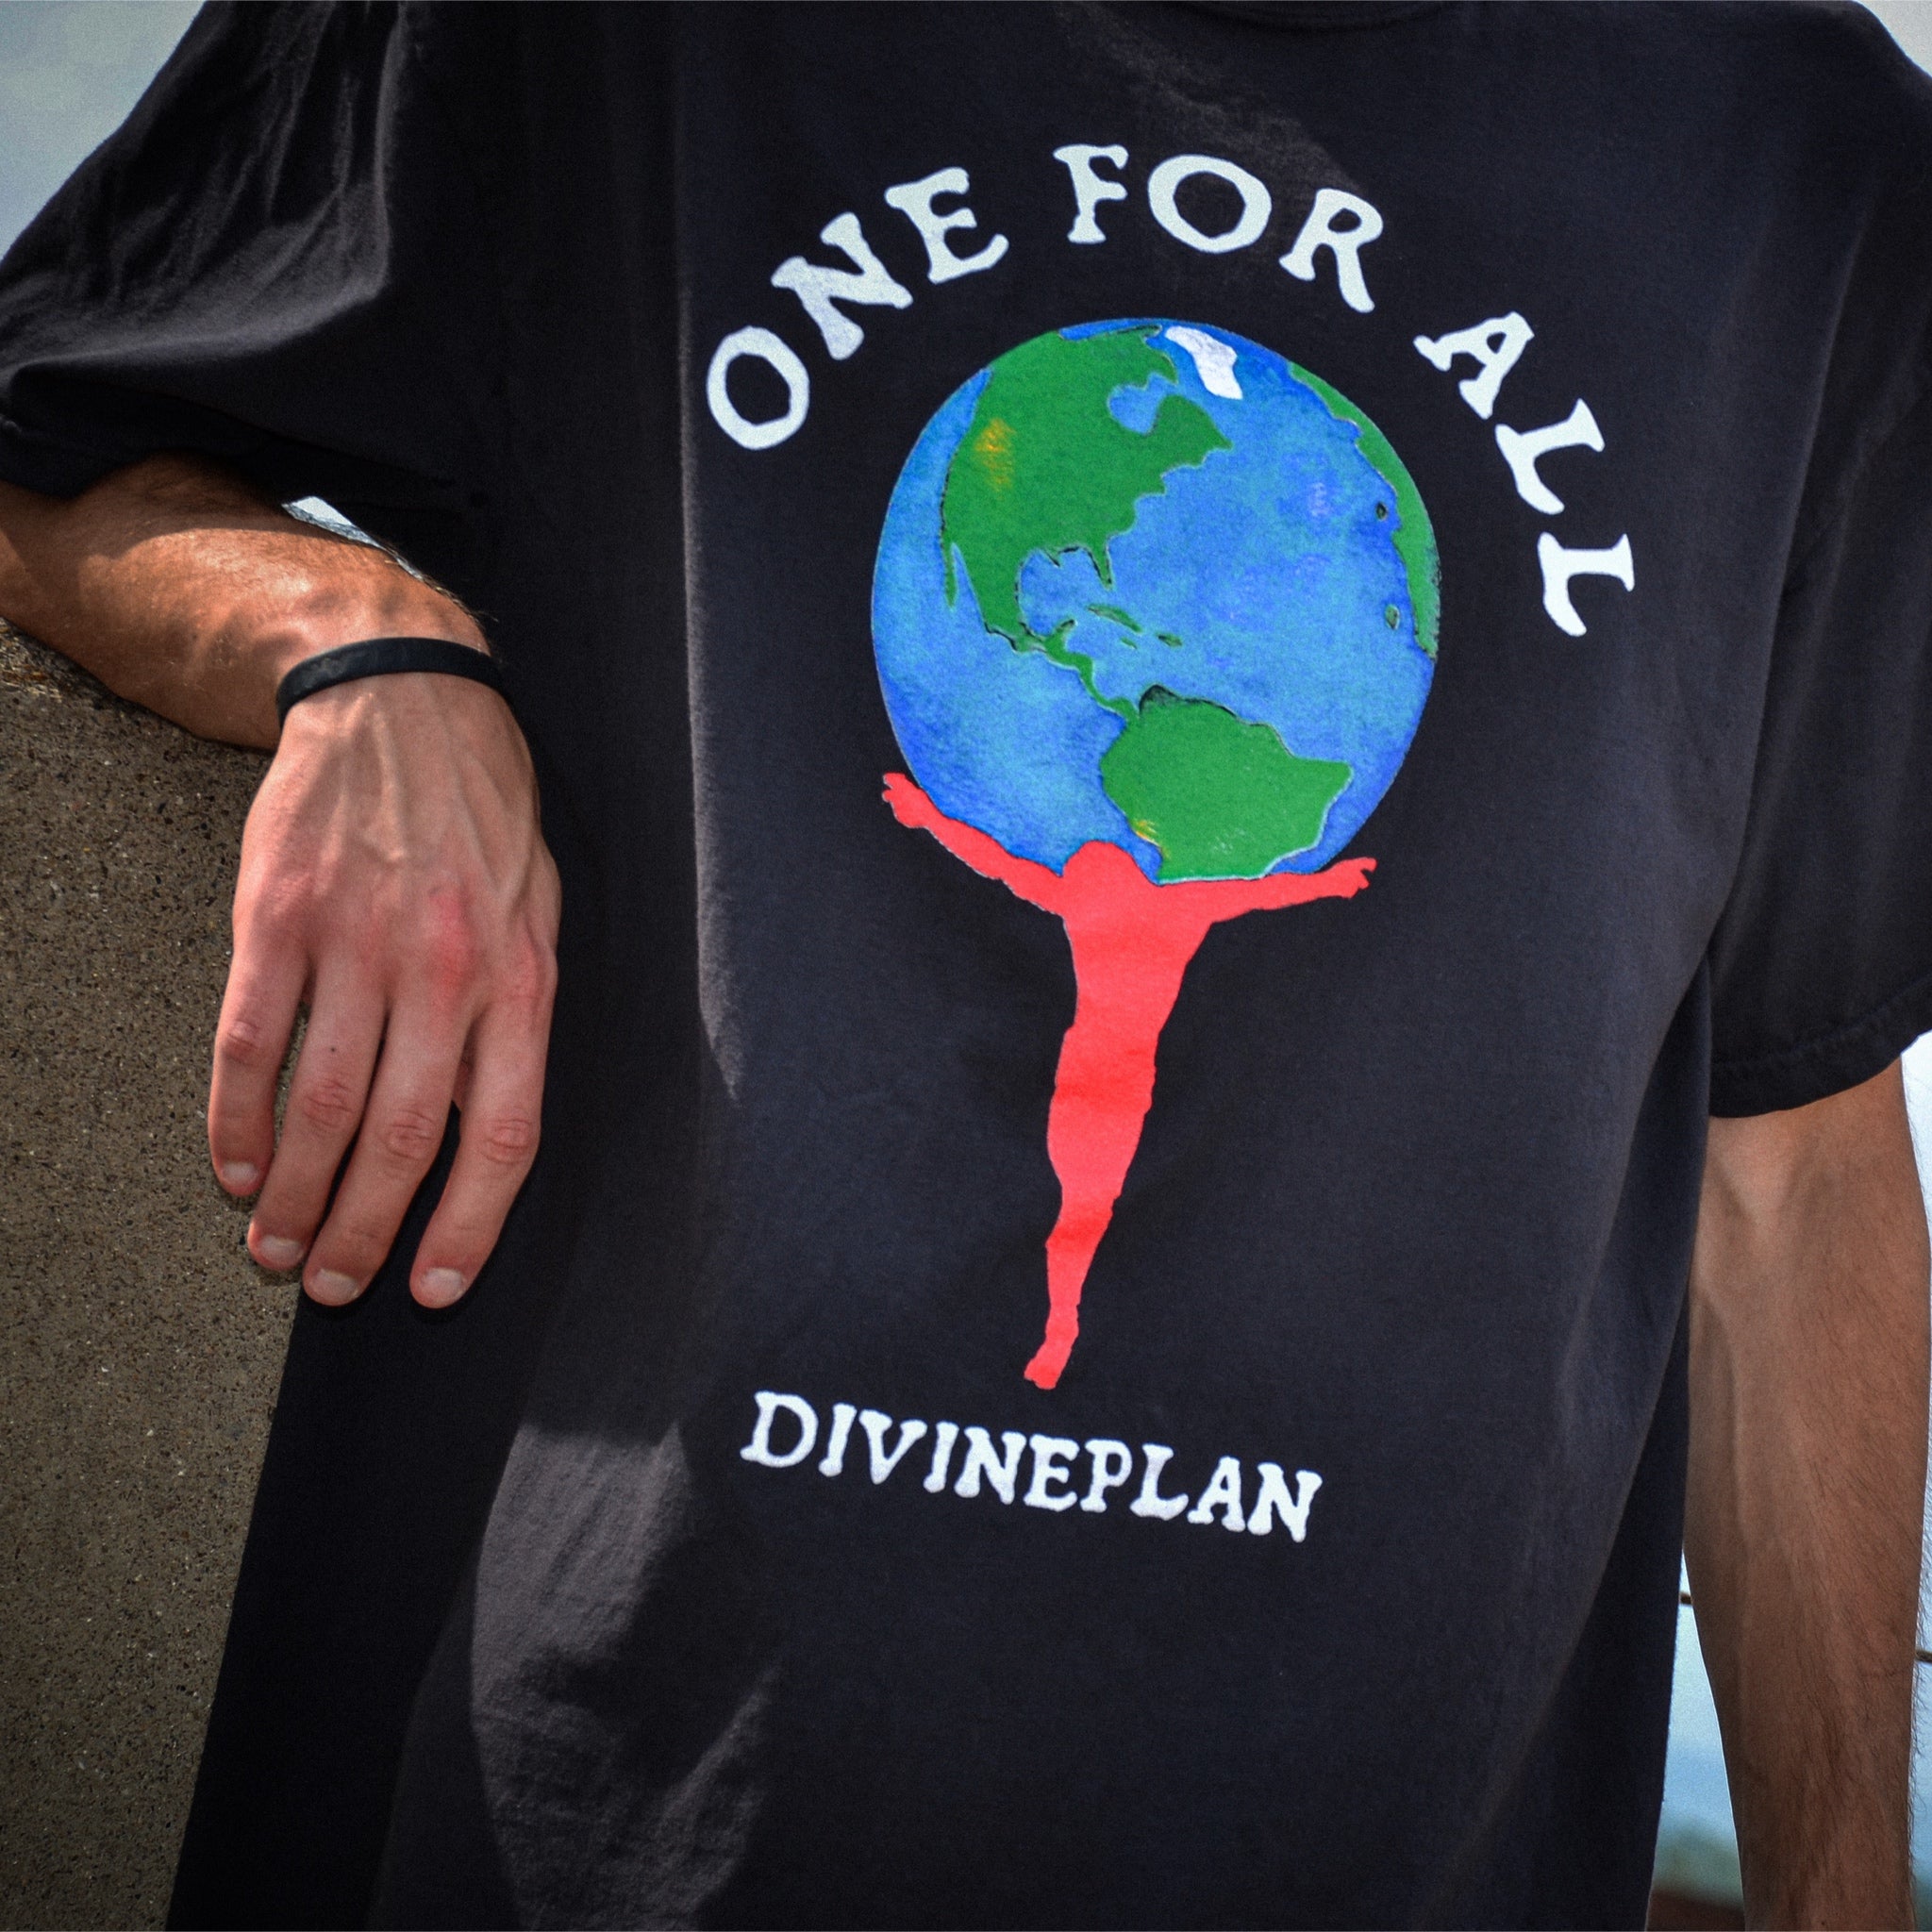 “ONE FOR ALL” T-shirt